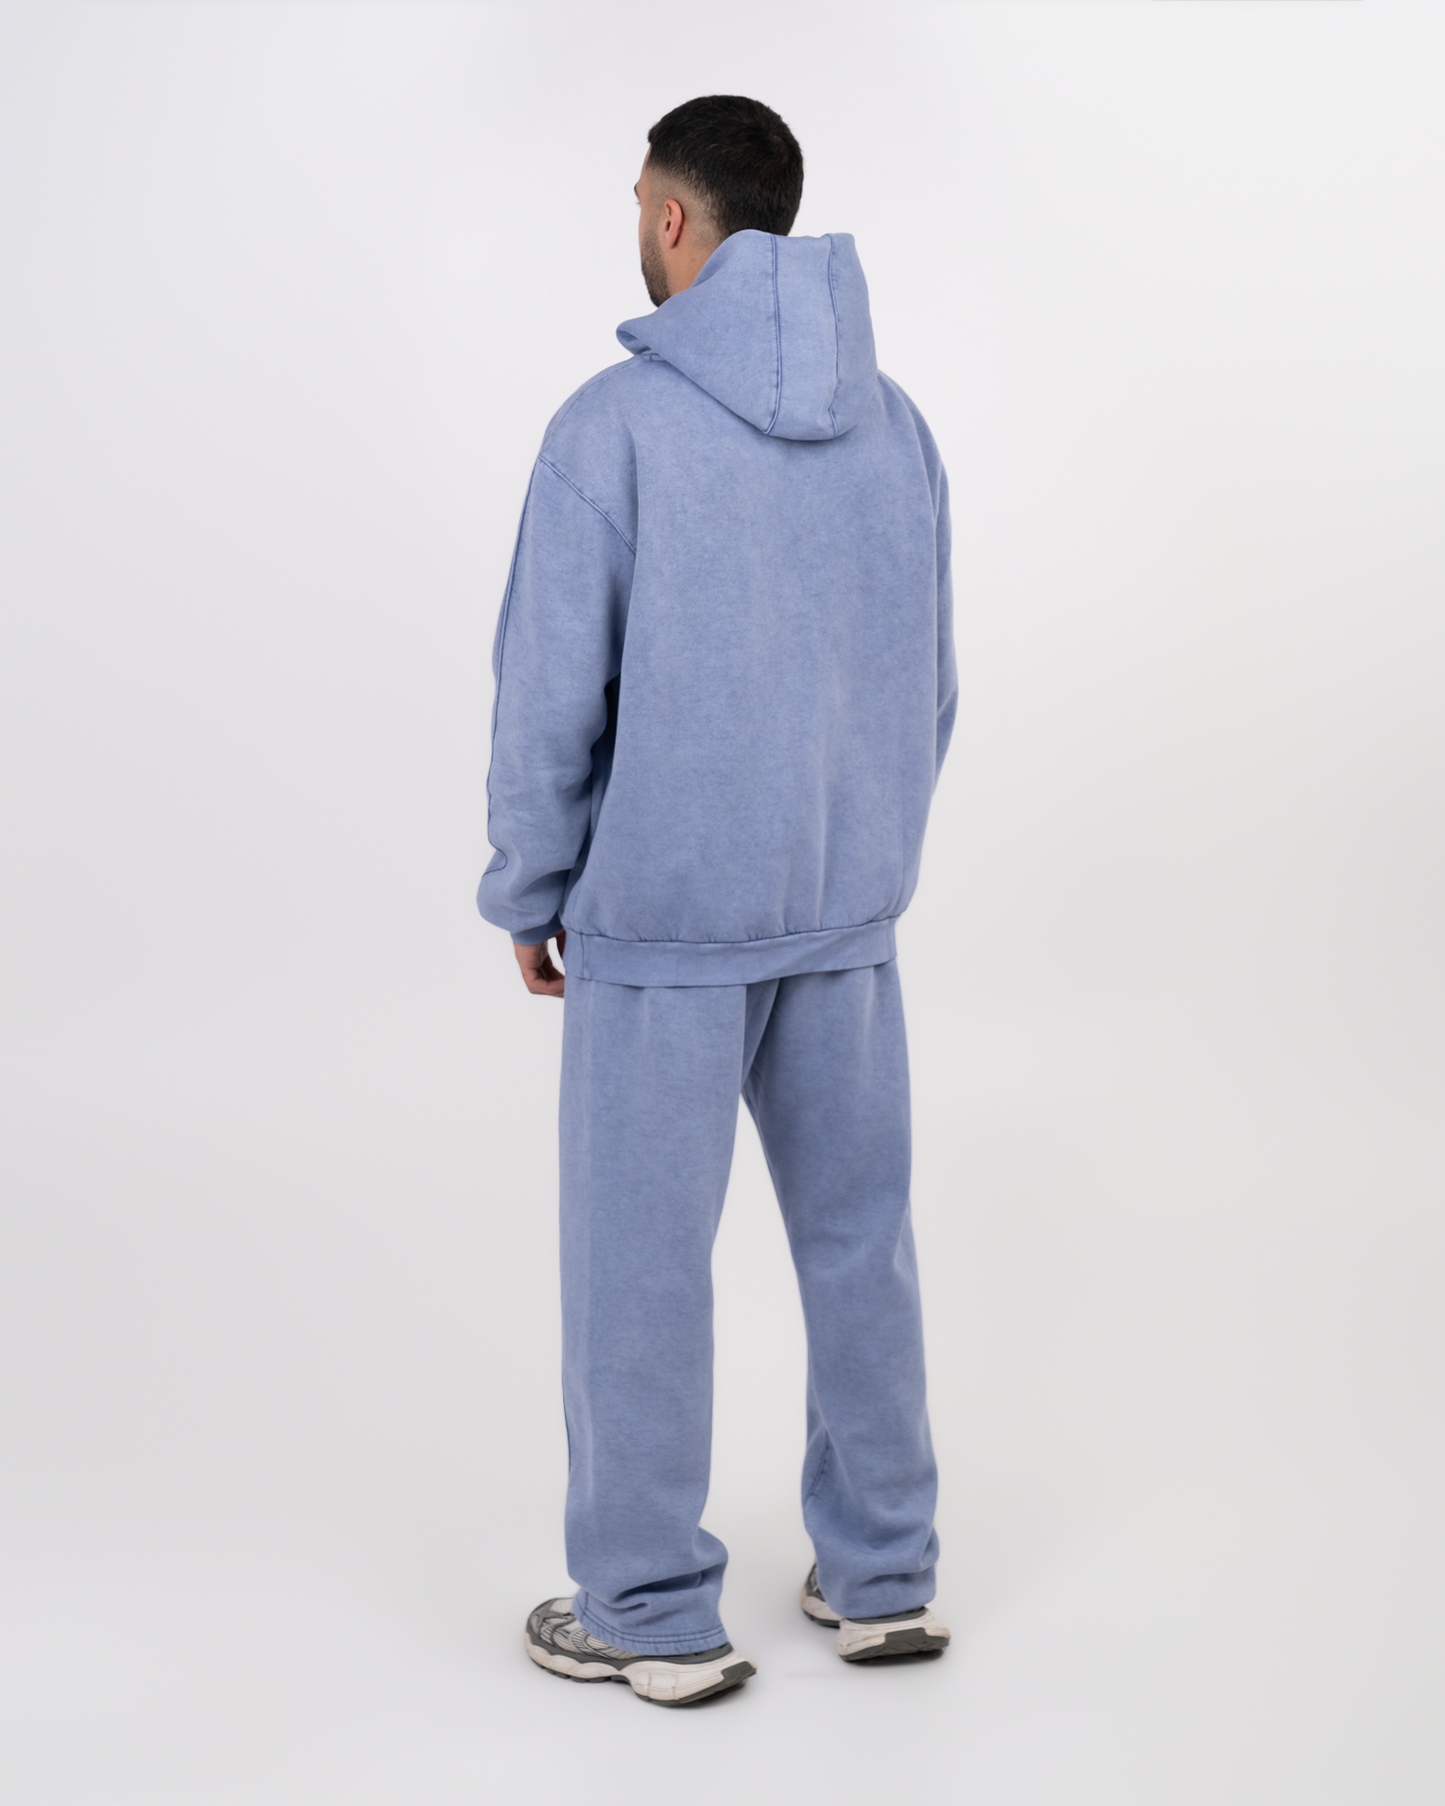 STITCHED BLUE JEANS HOODIE